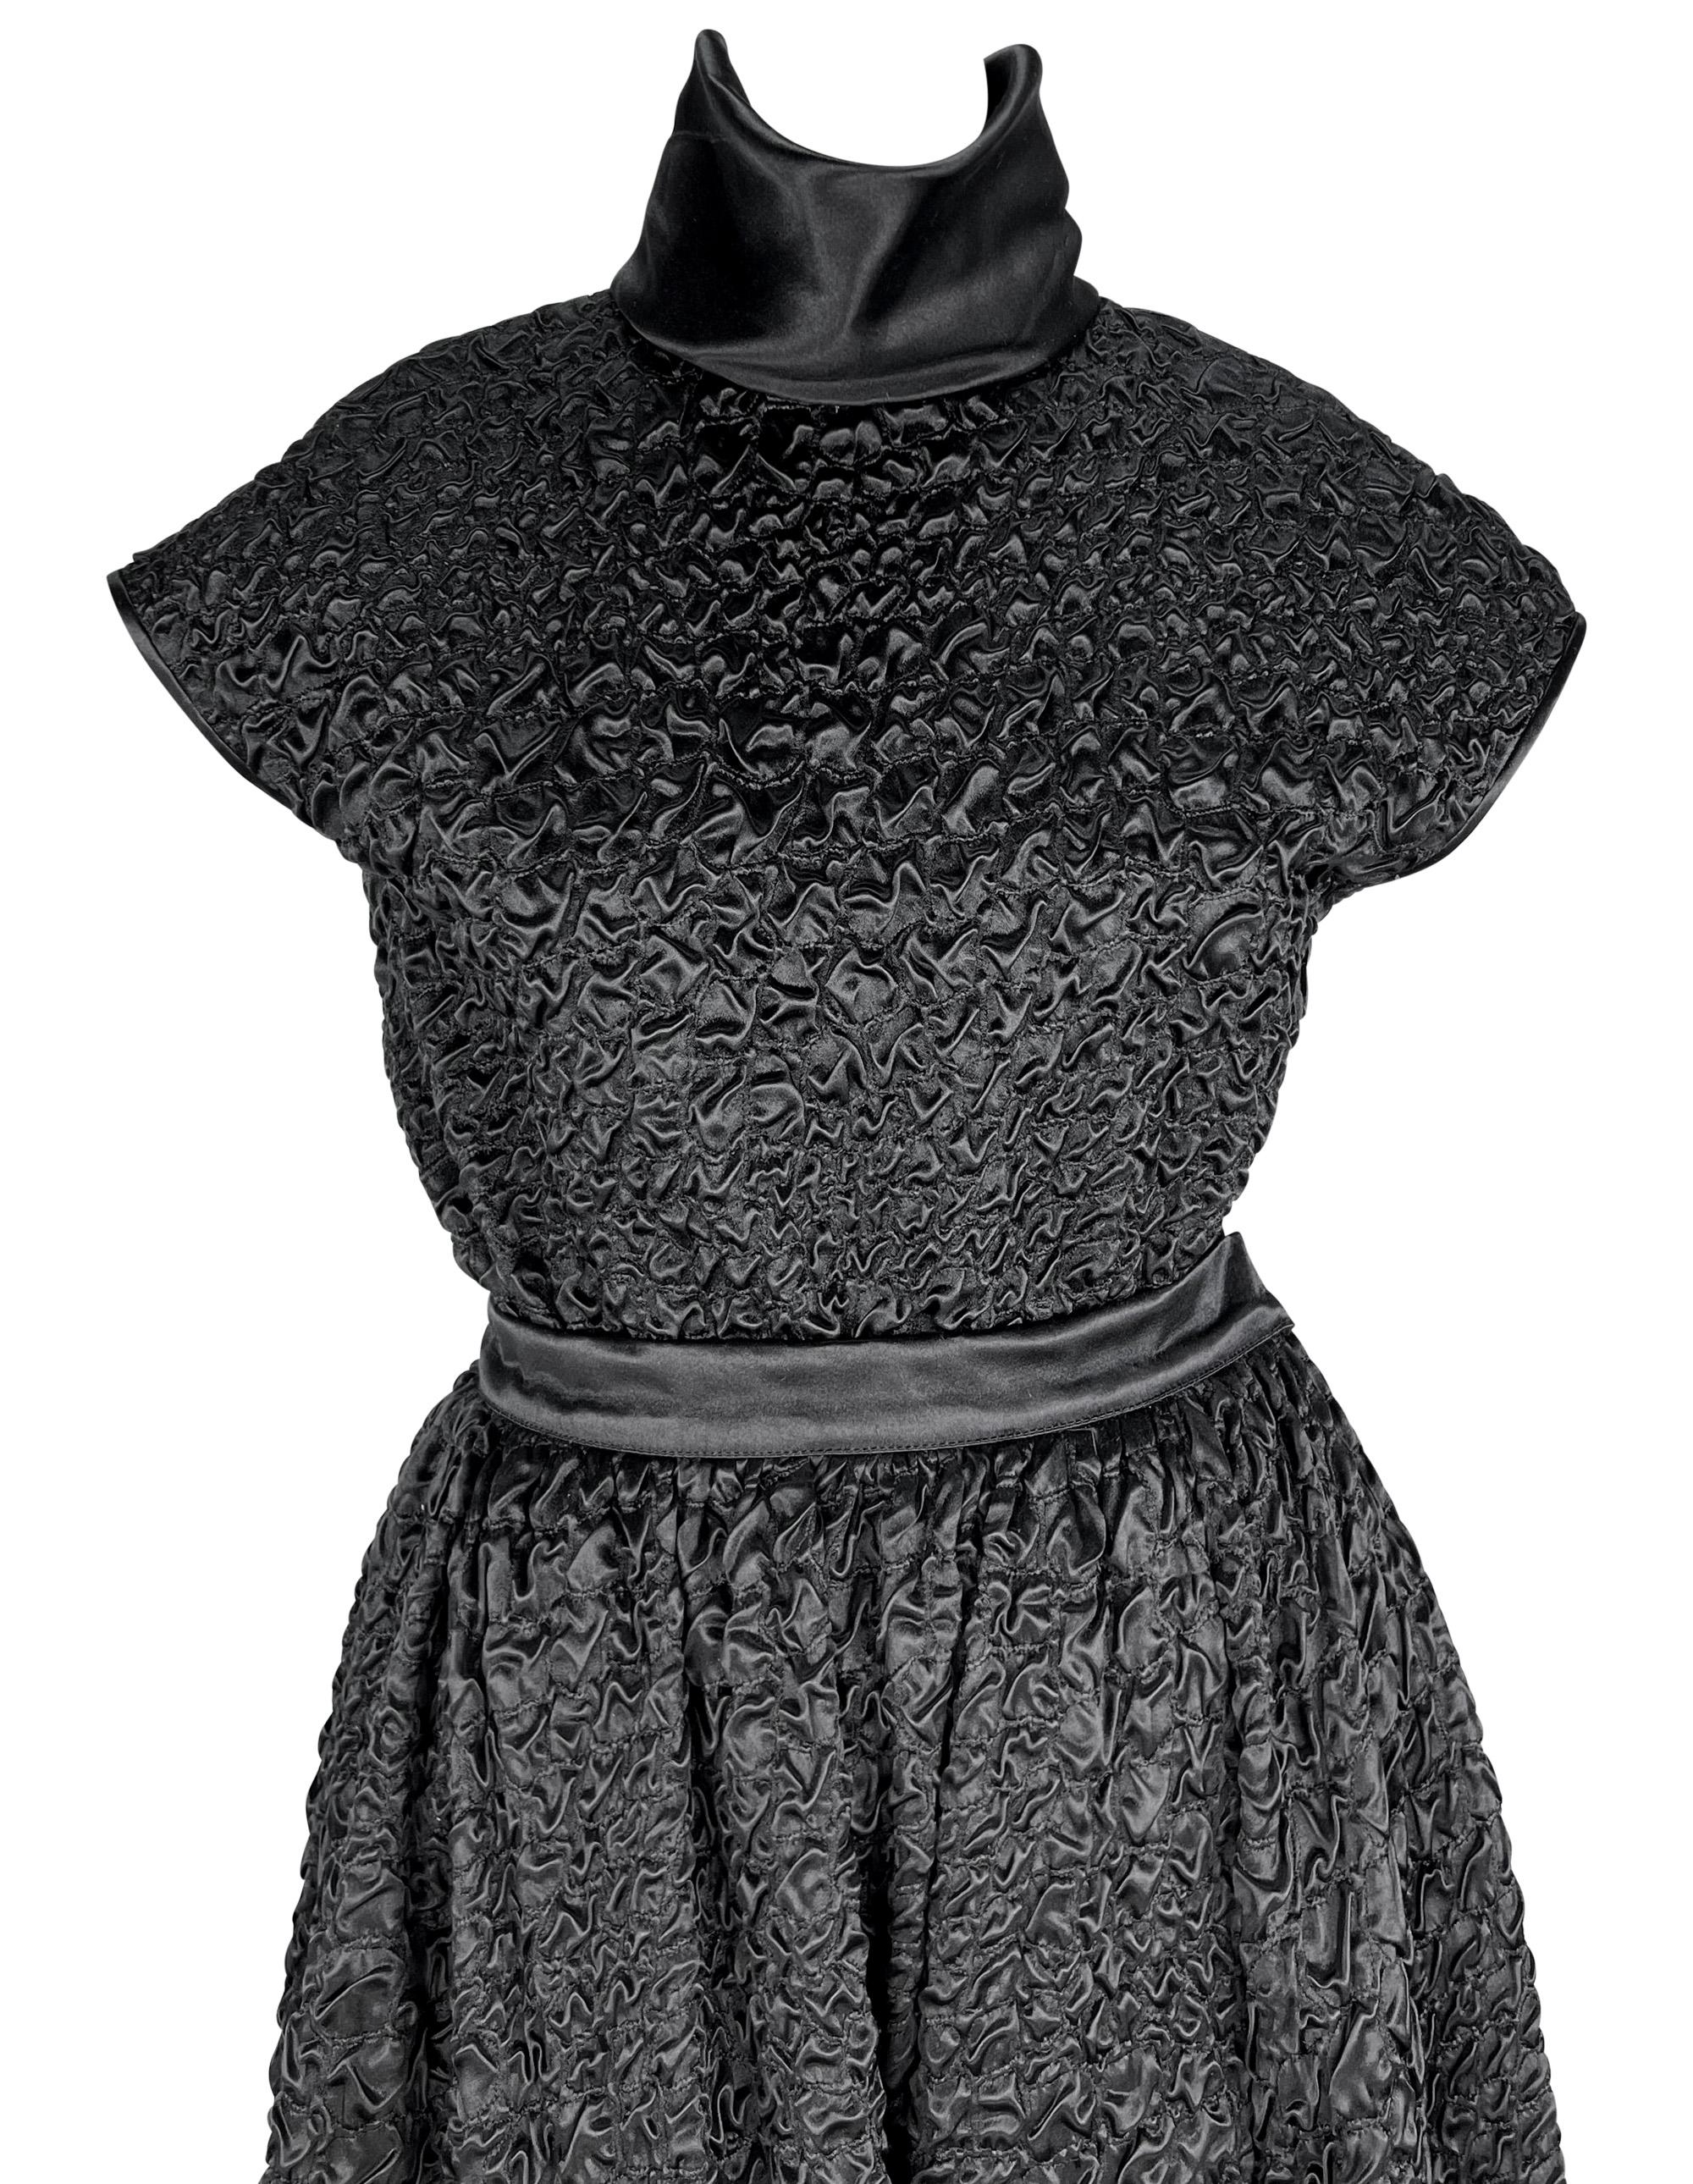 F/W 1986 Valentino Garavani Ruched Black Silk Evening Skirt Set Gown In Excellent Condition For Sale In West Hollywood, CA